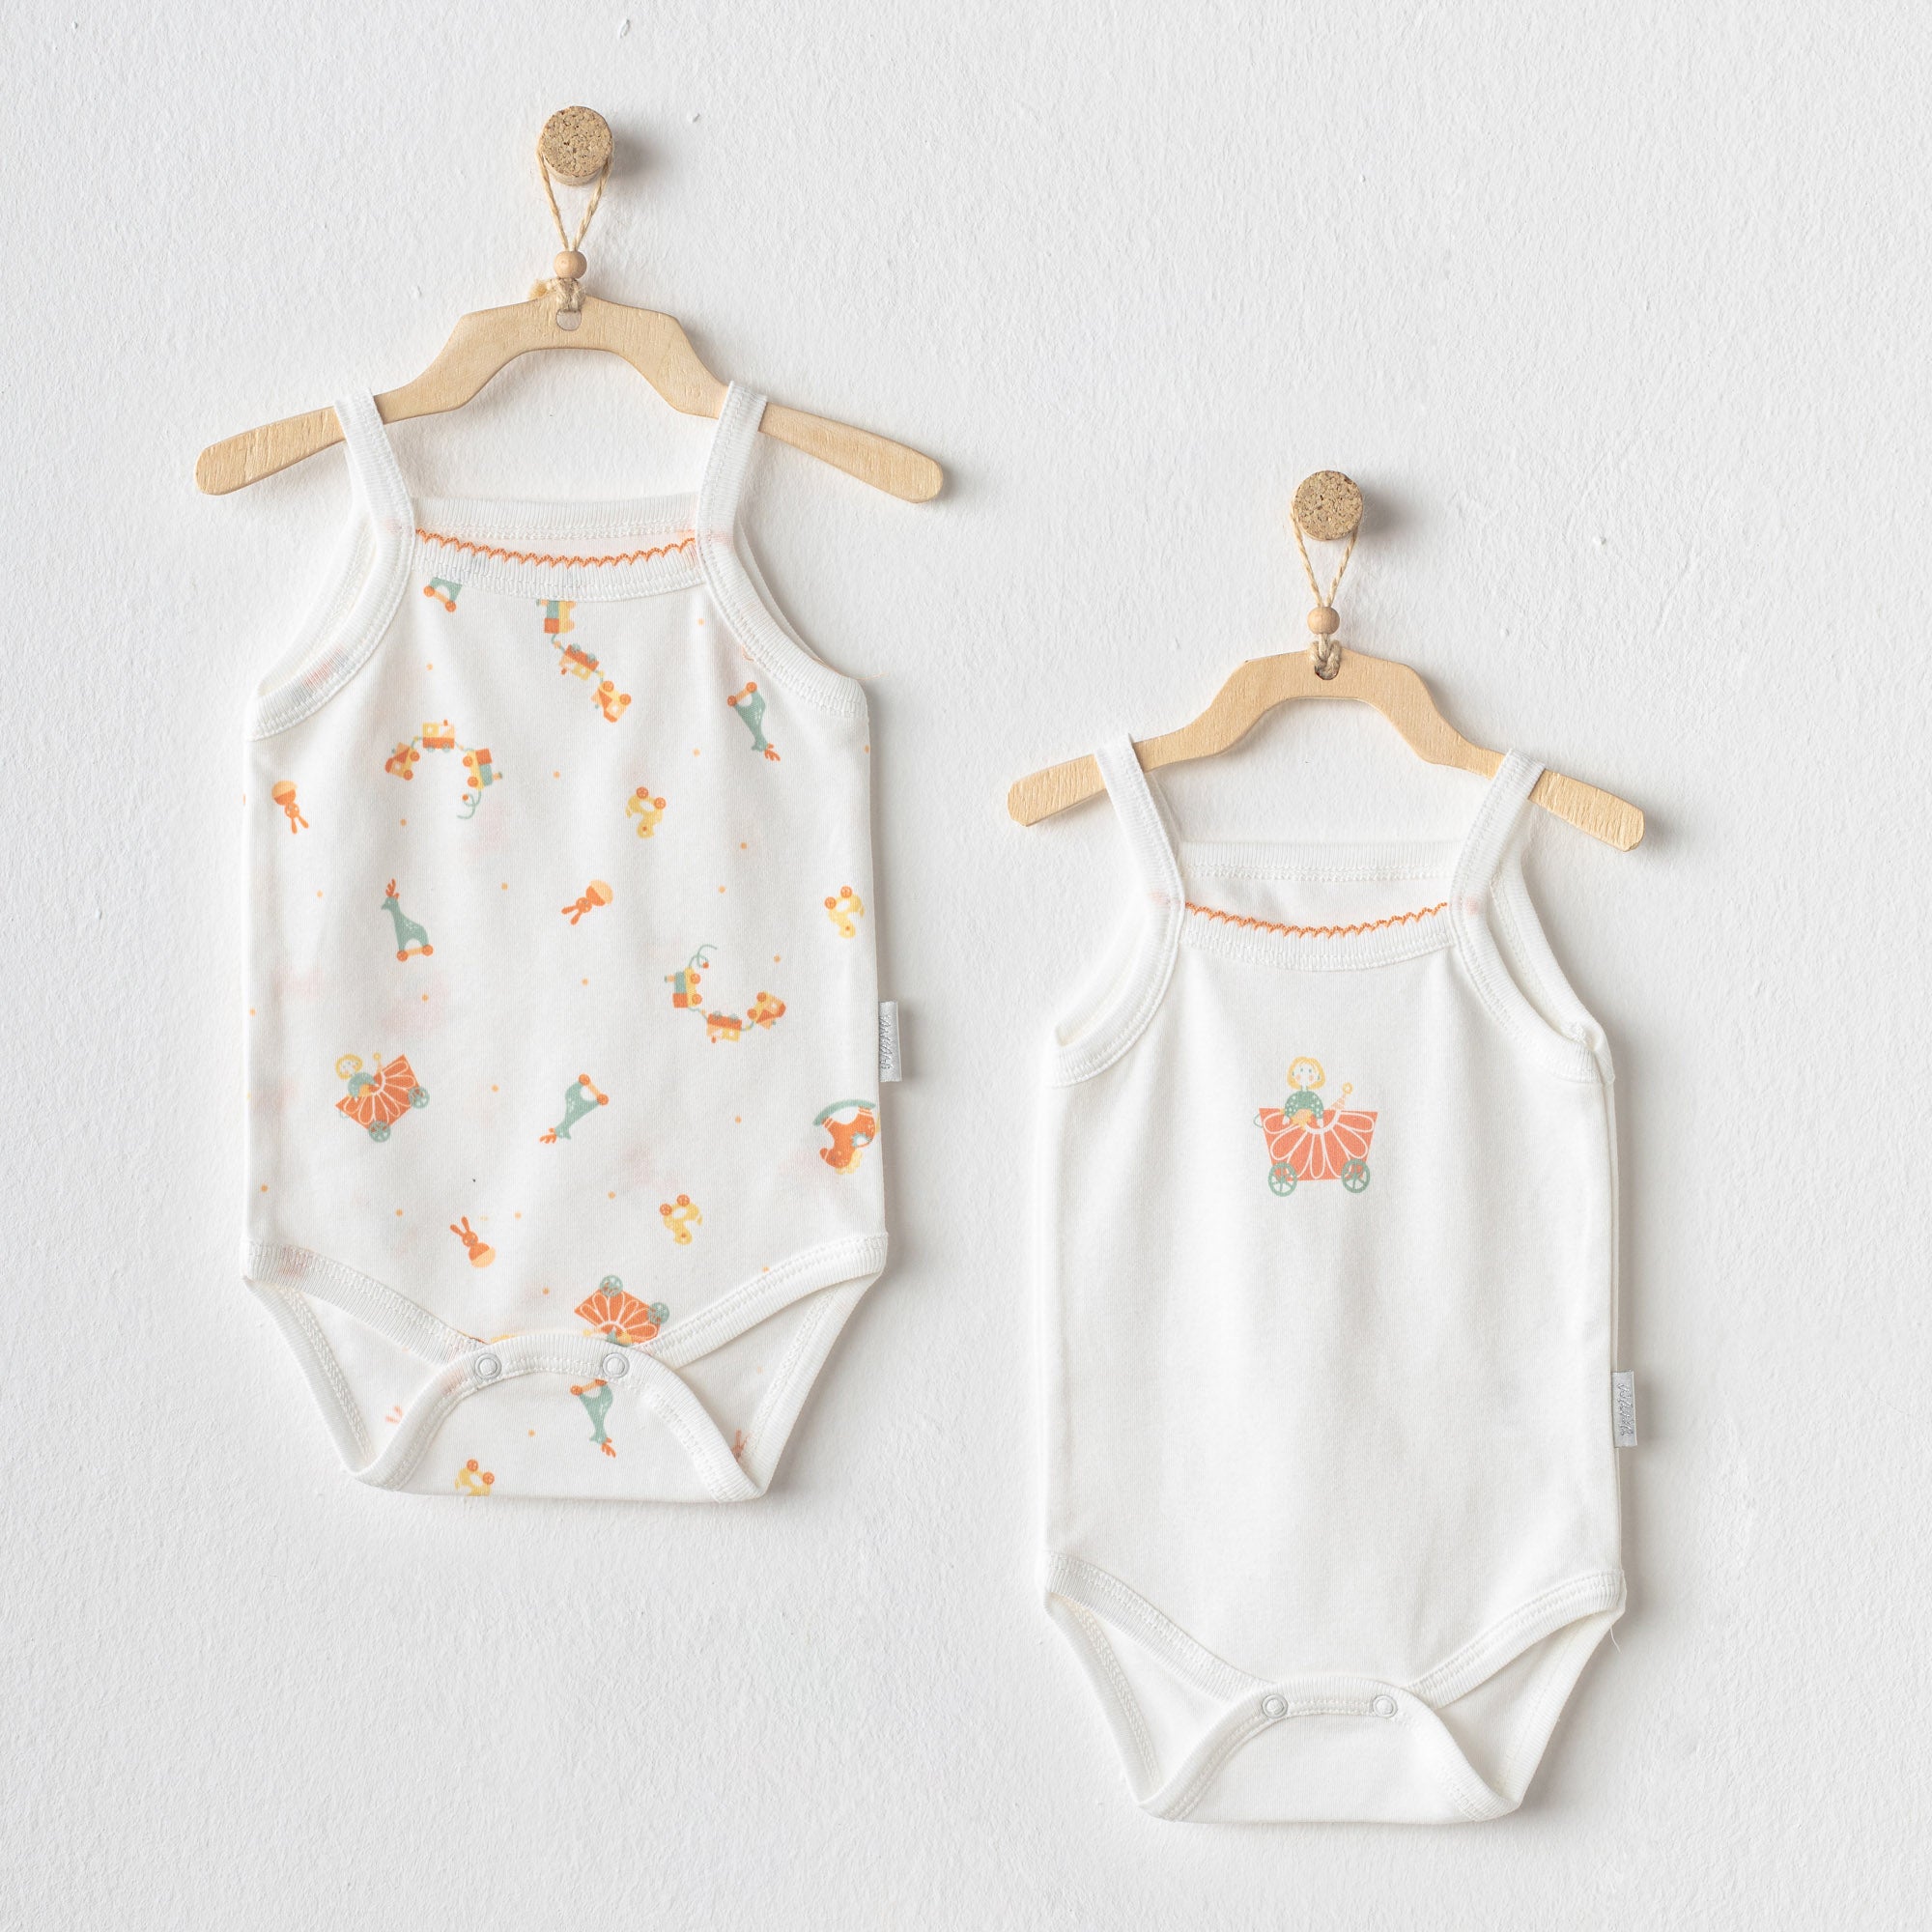 Cute Playmate Strappy Bodysuits - Cute Playmate Strappy Bodysuits - 1-3 Months - Andywawa - Melymod